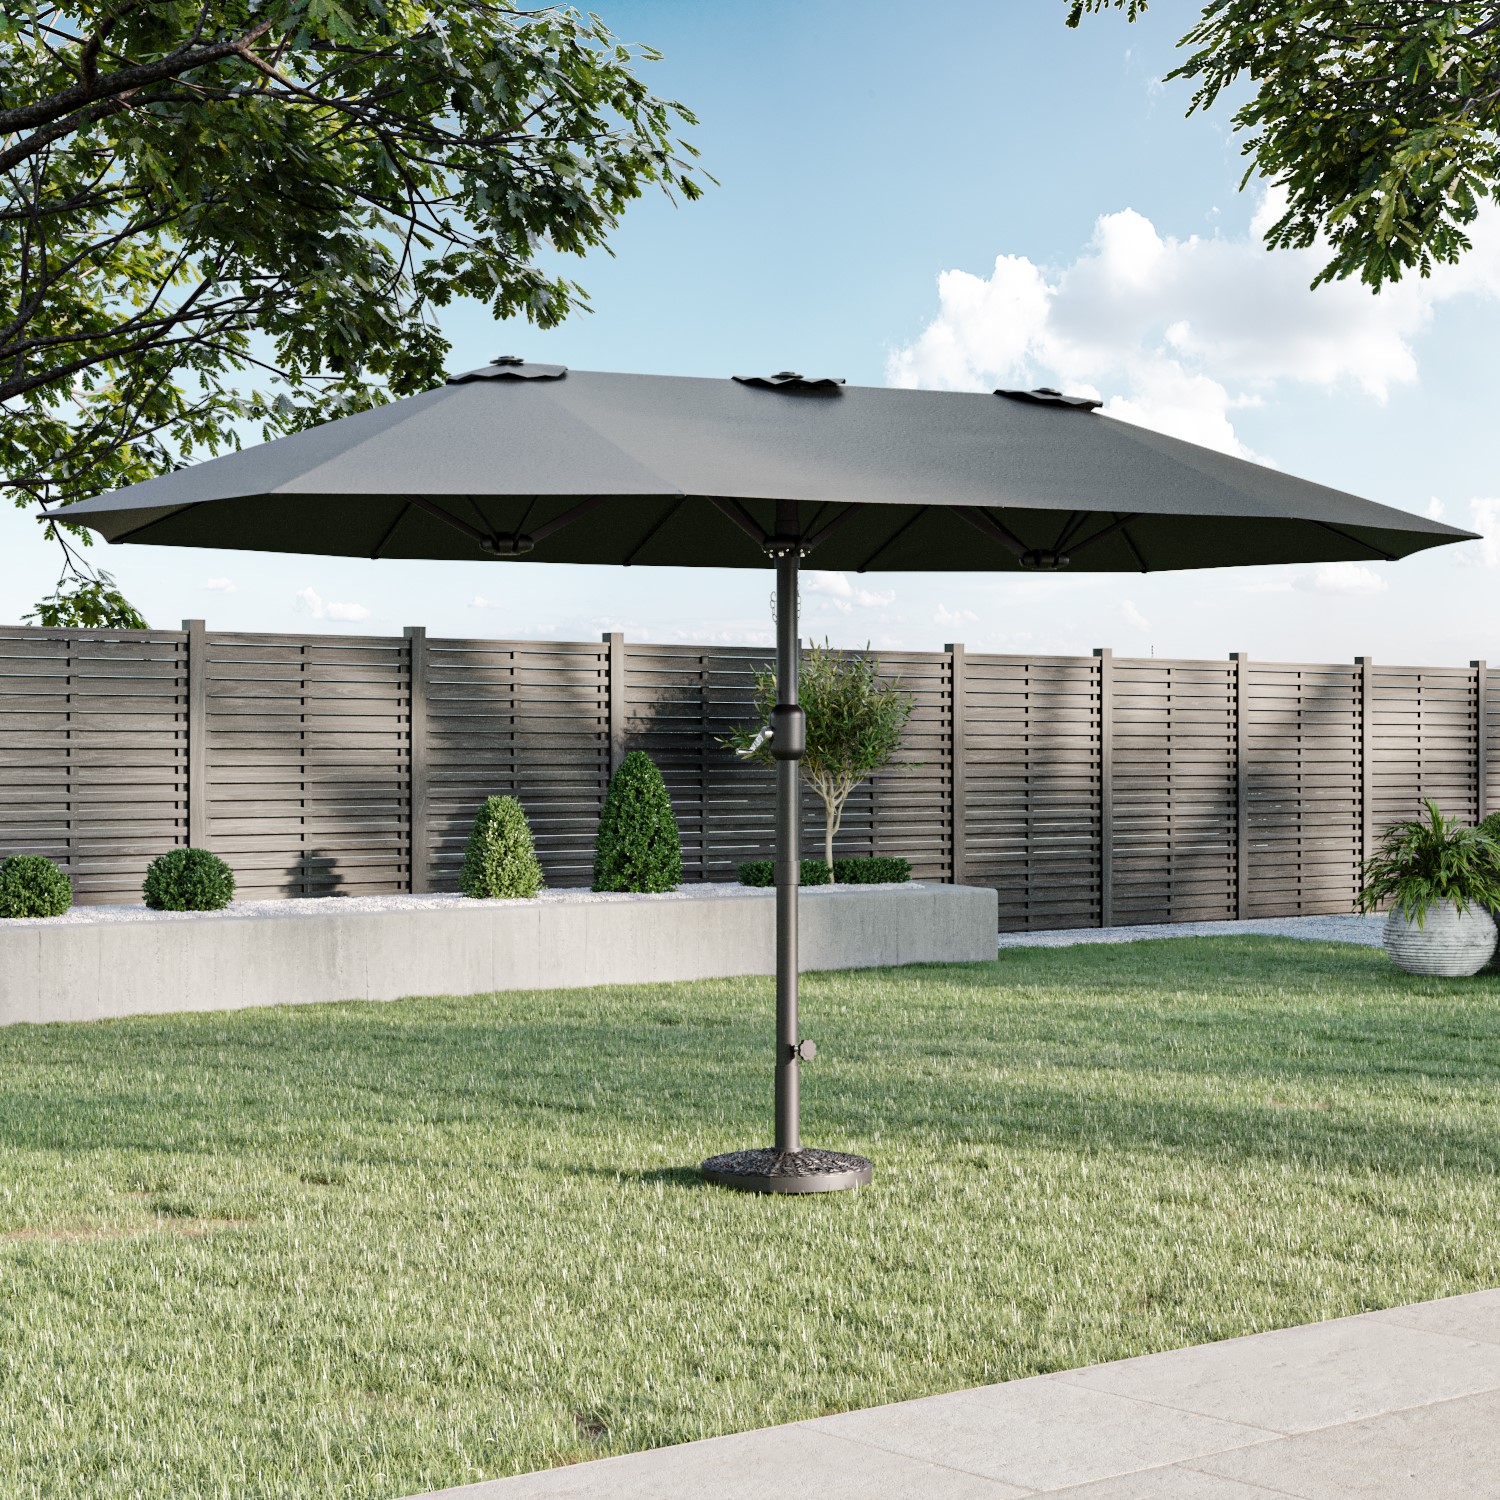 Photo of 2.7x4.5m large double sided grey parasol with base - como